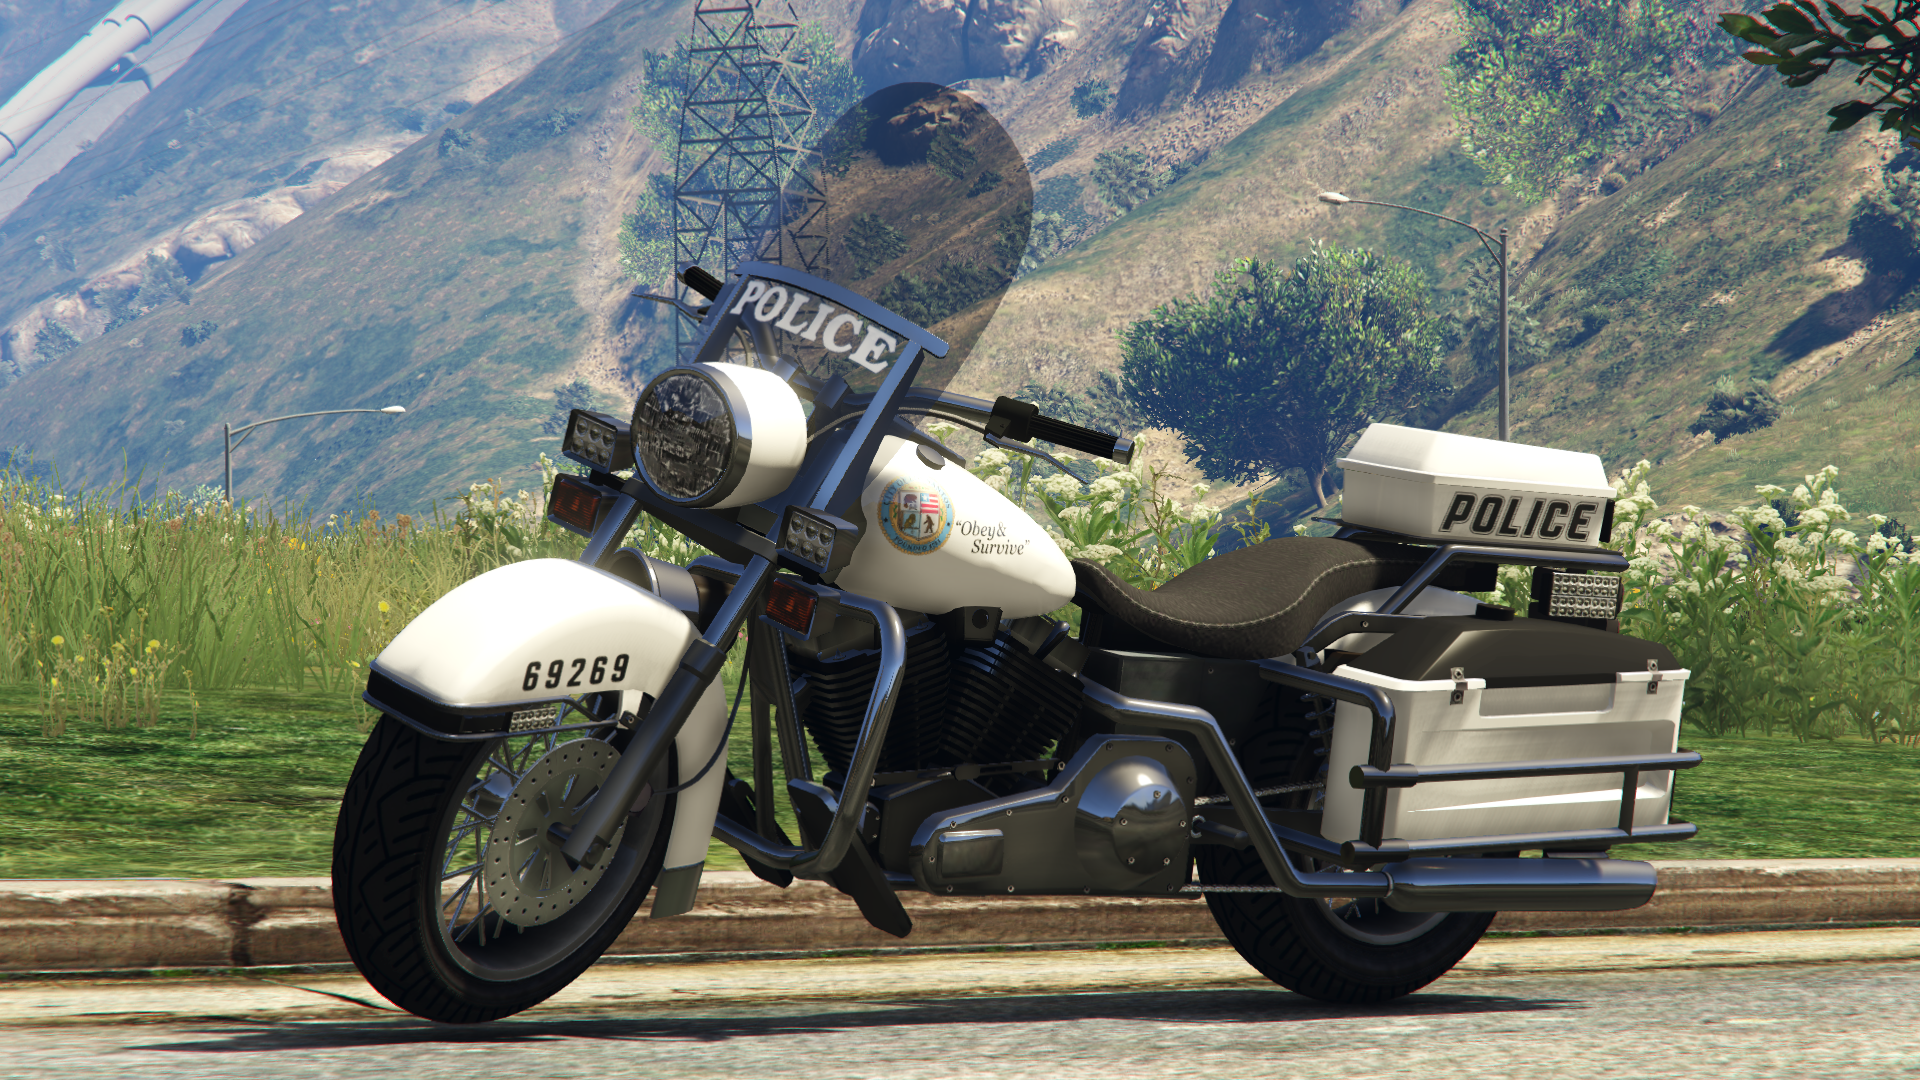 FCR-900 (Motorcycle), Grand Theft Auto San Andreas Wiki